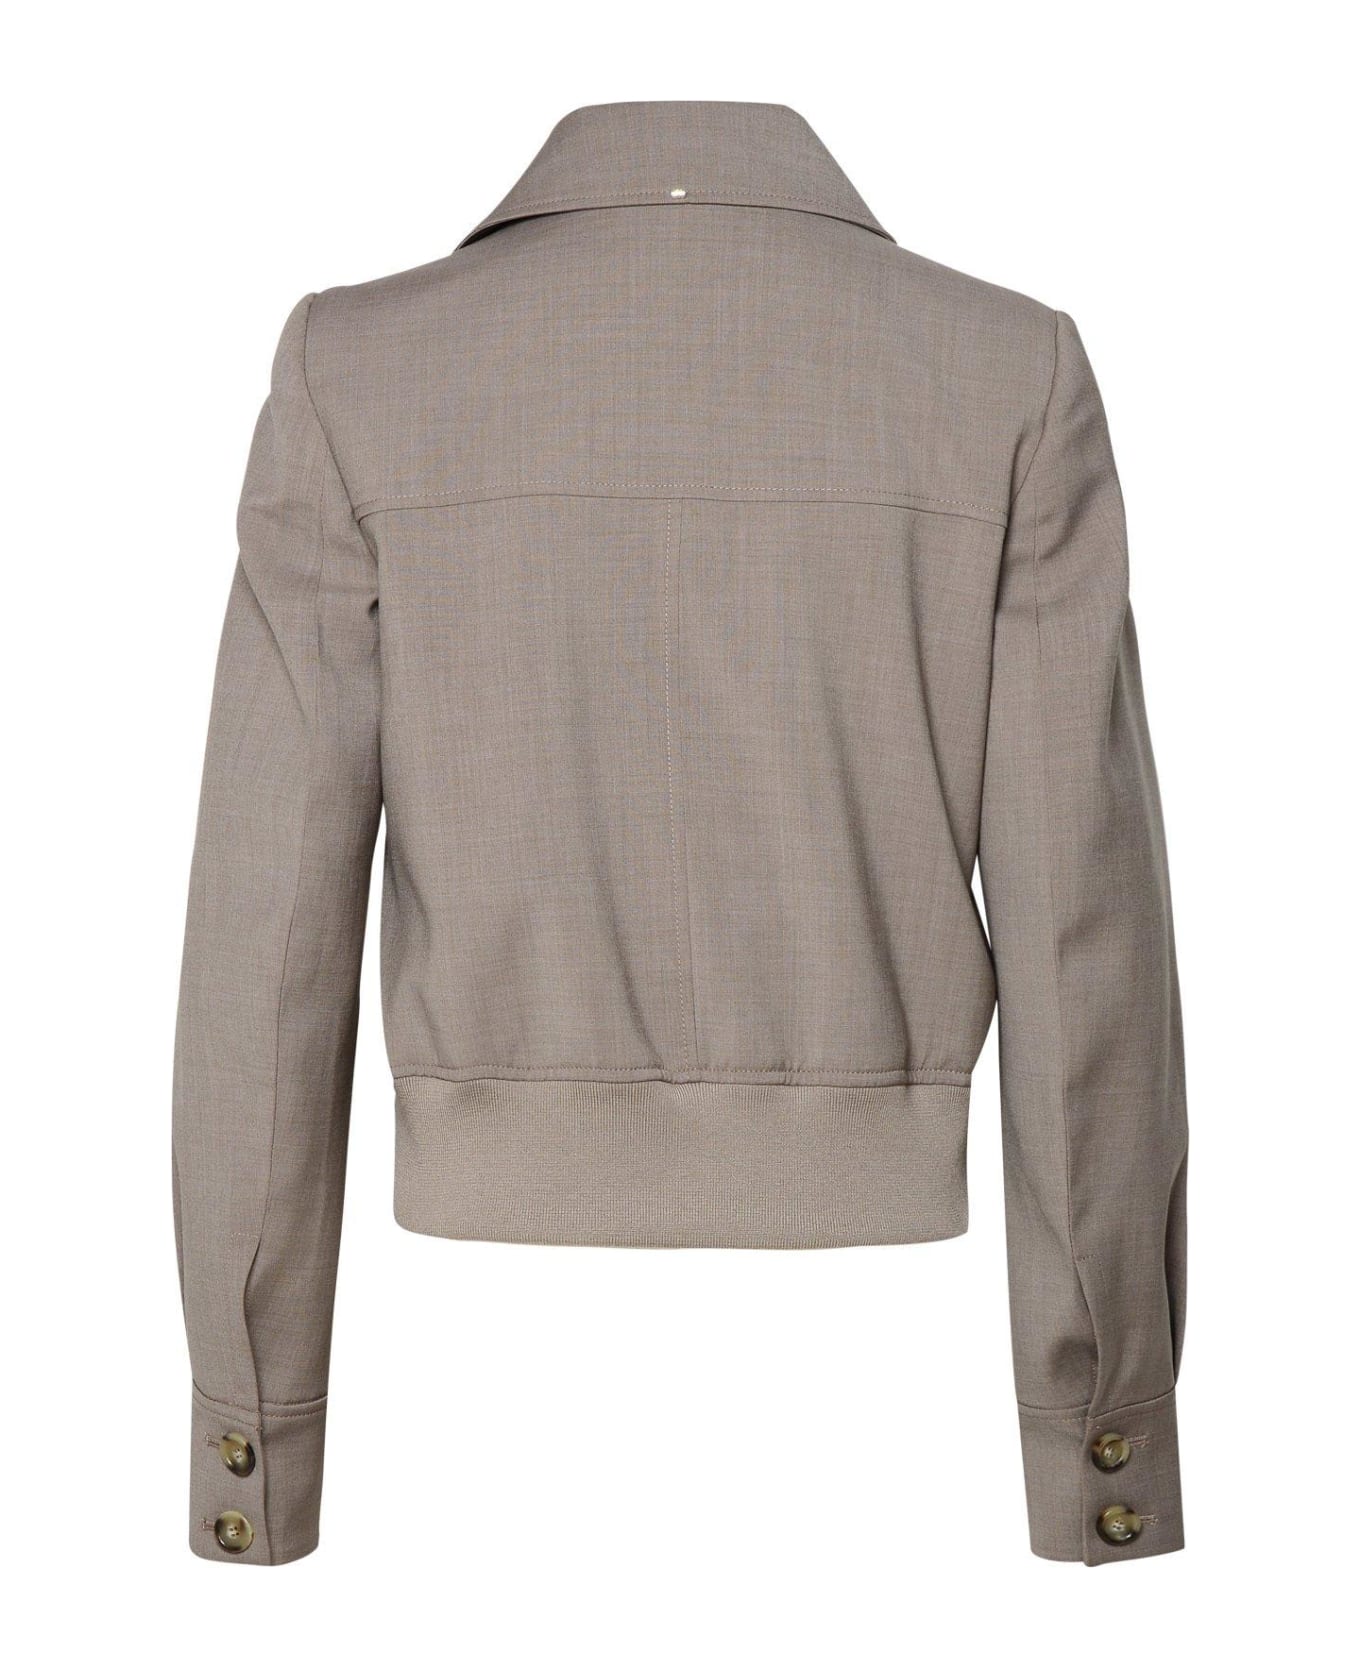 SportMax Button Detailed Long-sleeved Jacket - GREY